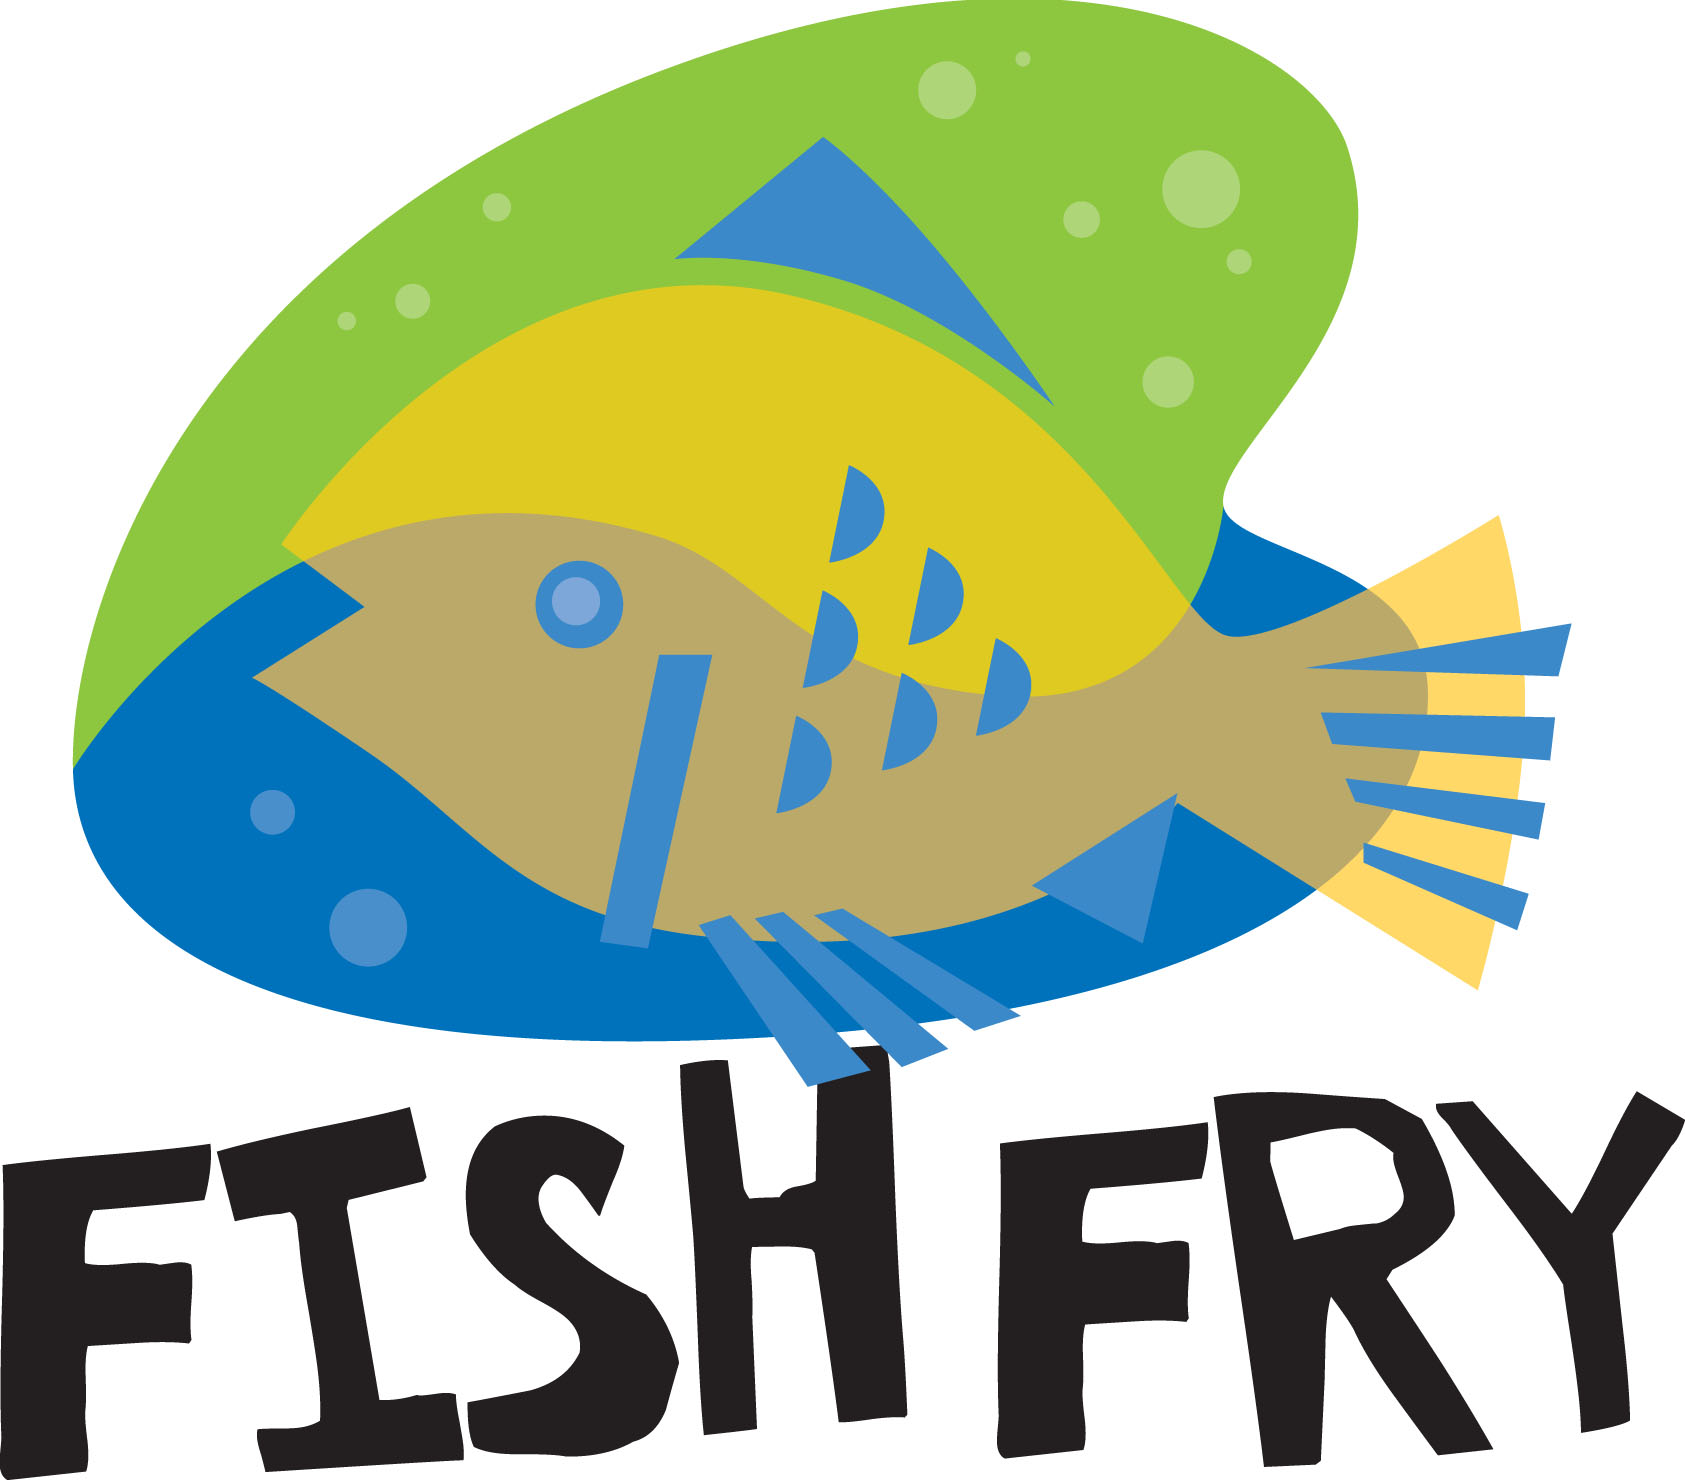 free clipart images fish fry - photo #23